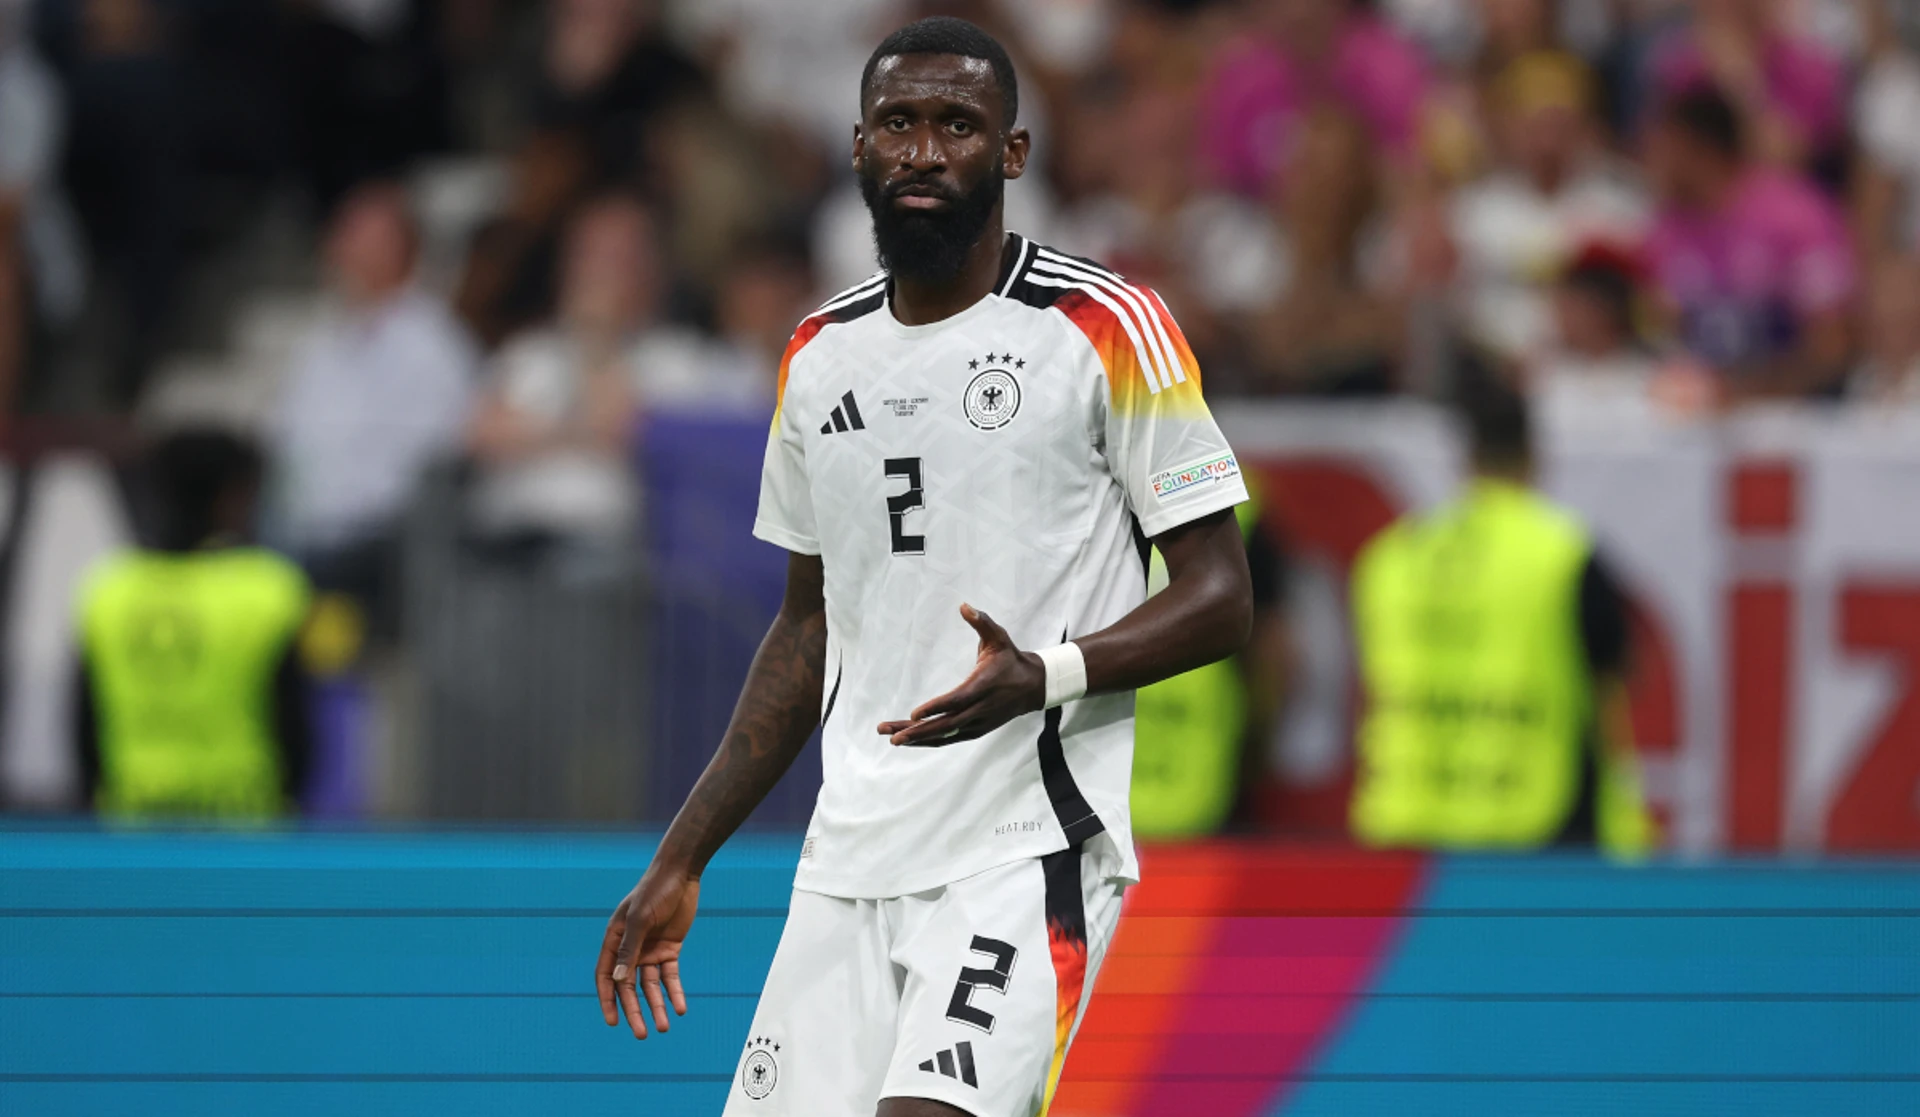 Injured Rudiger in doubt for Germany's last 16 match